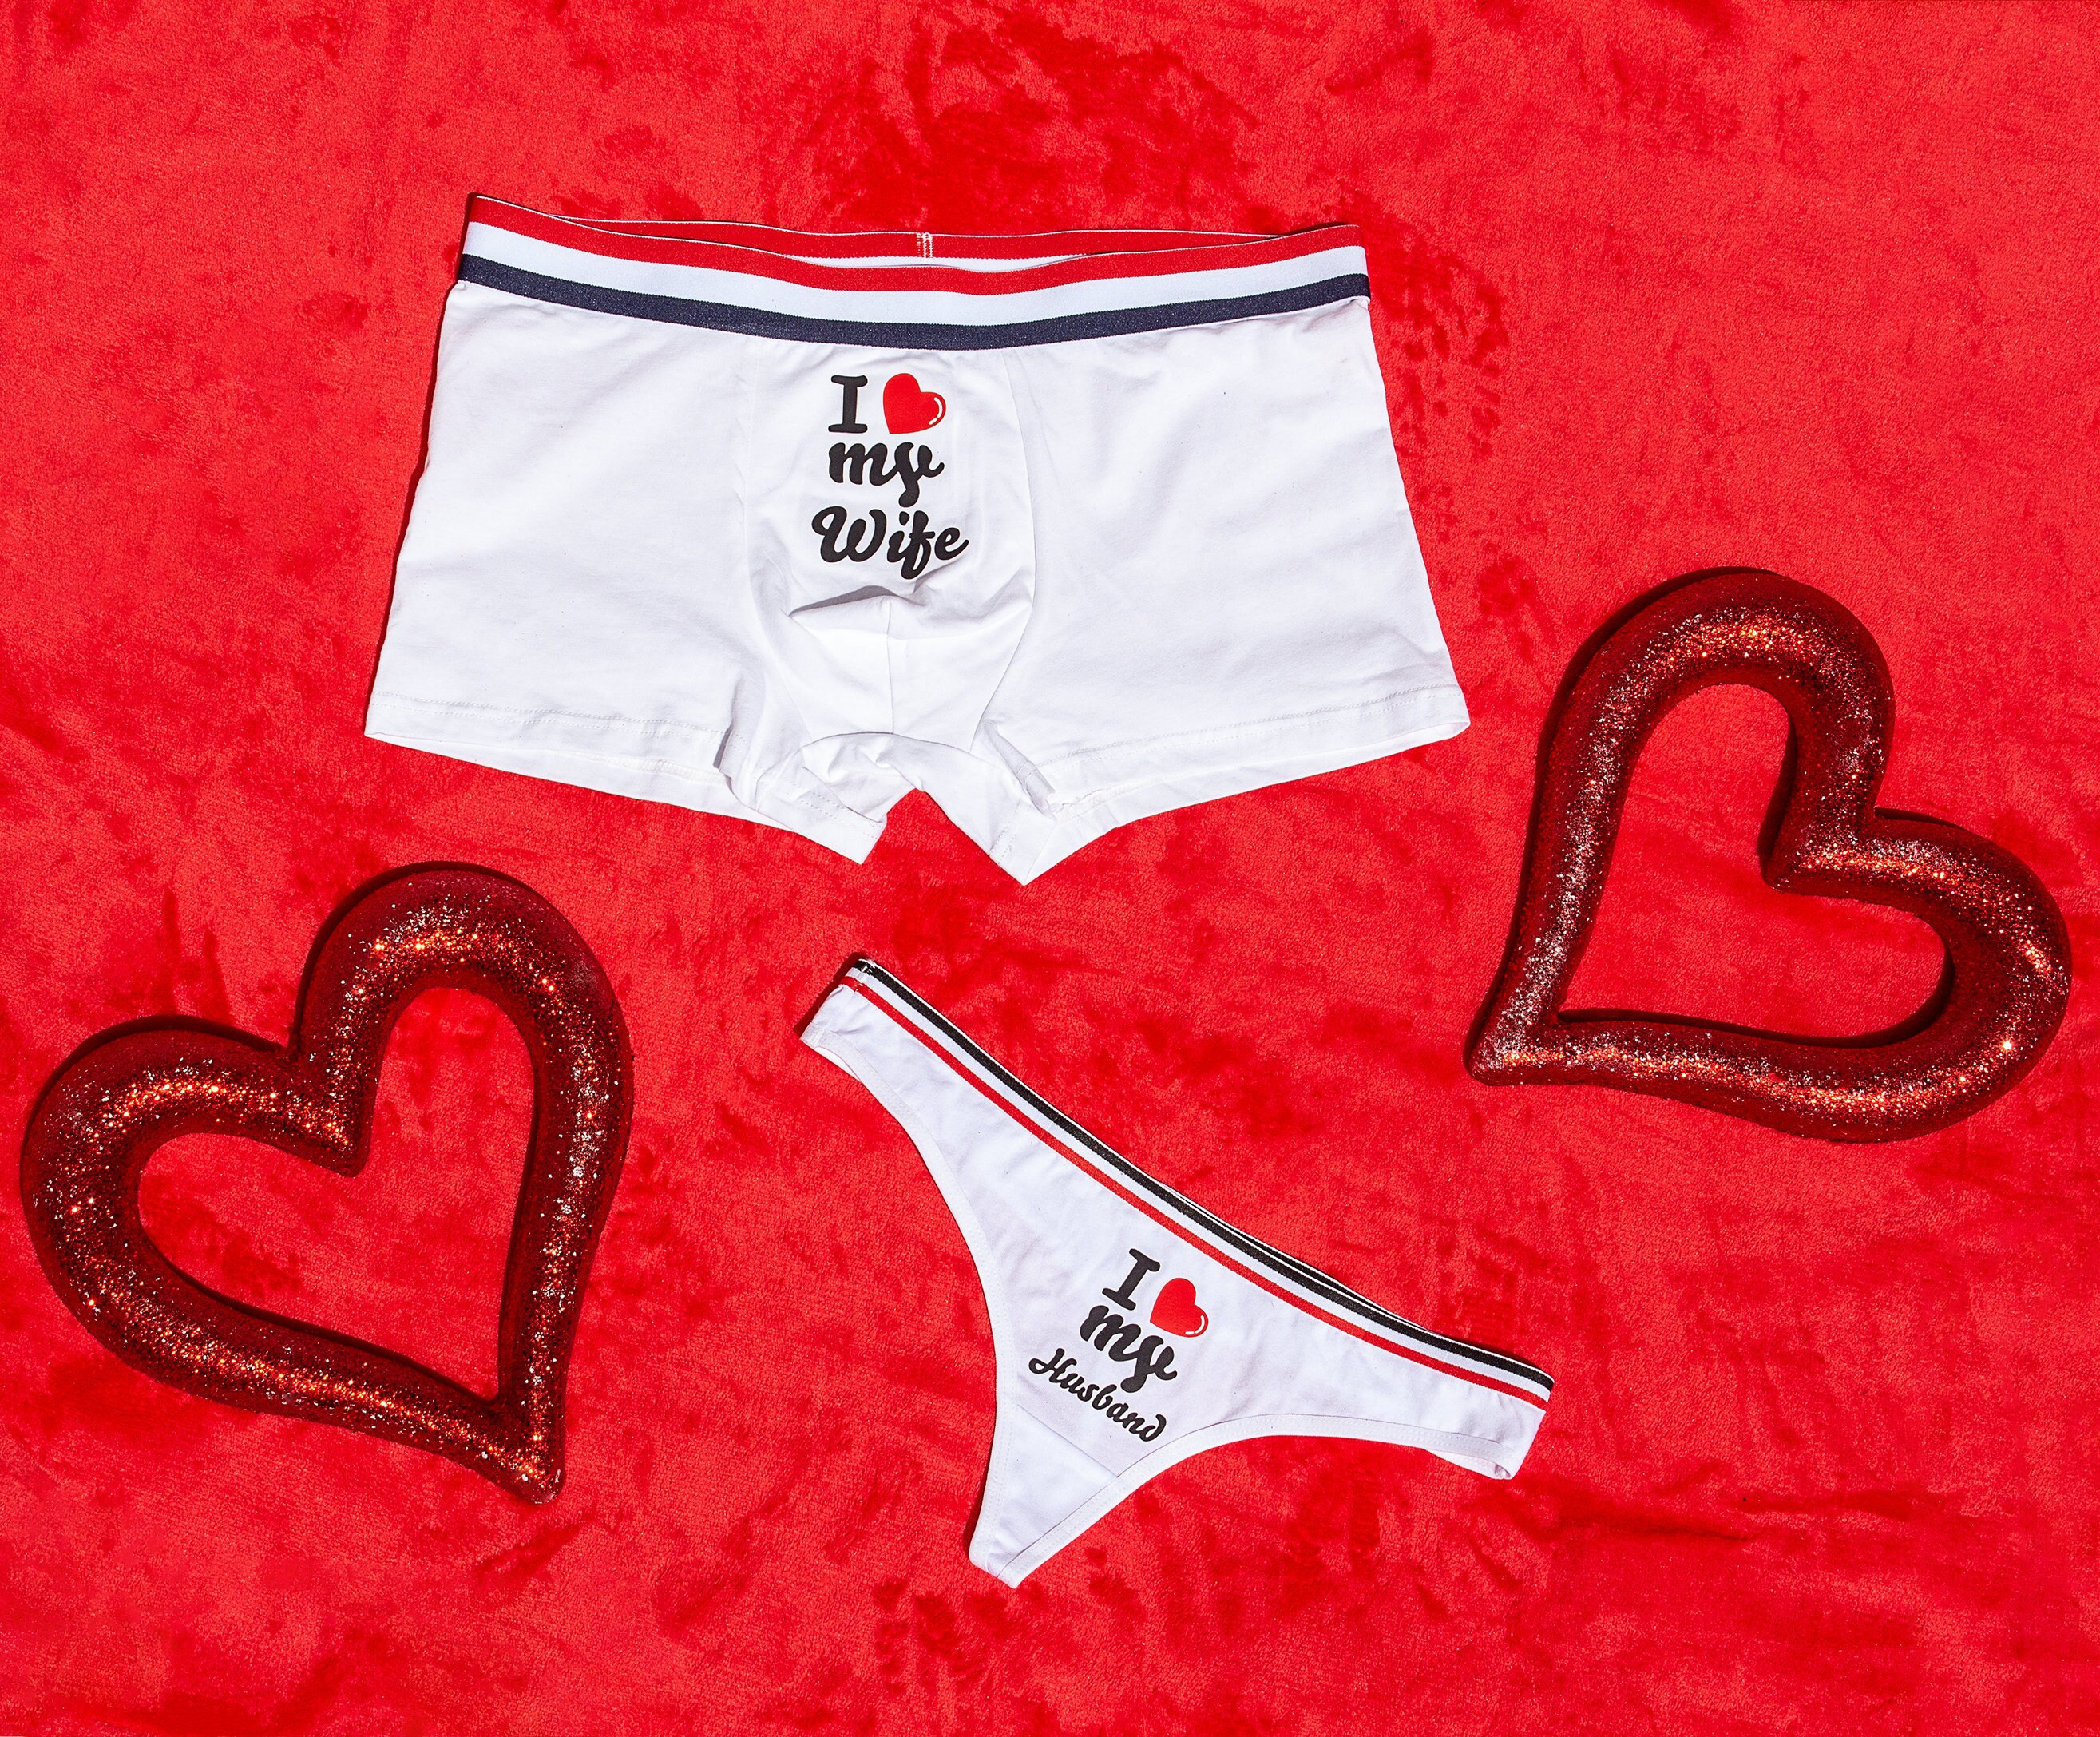  Couples Underwear Matching Set, His and Hers Underwear Set,  Novelty Underwear, Set of 2 : Handmade Products